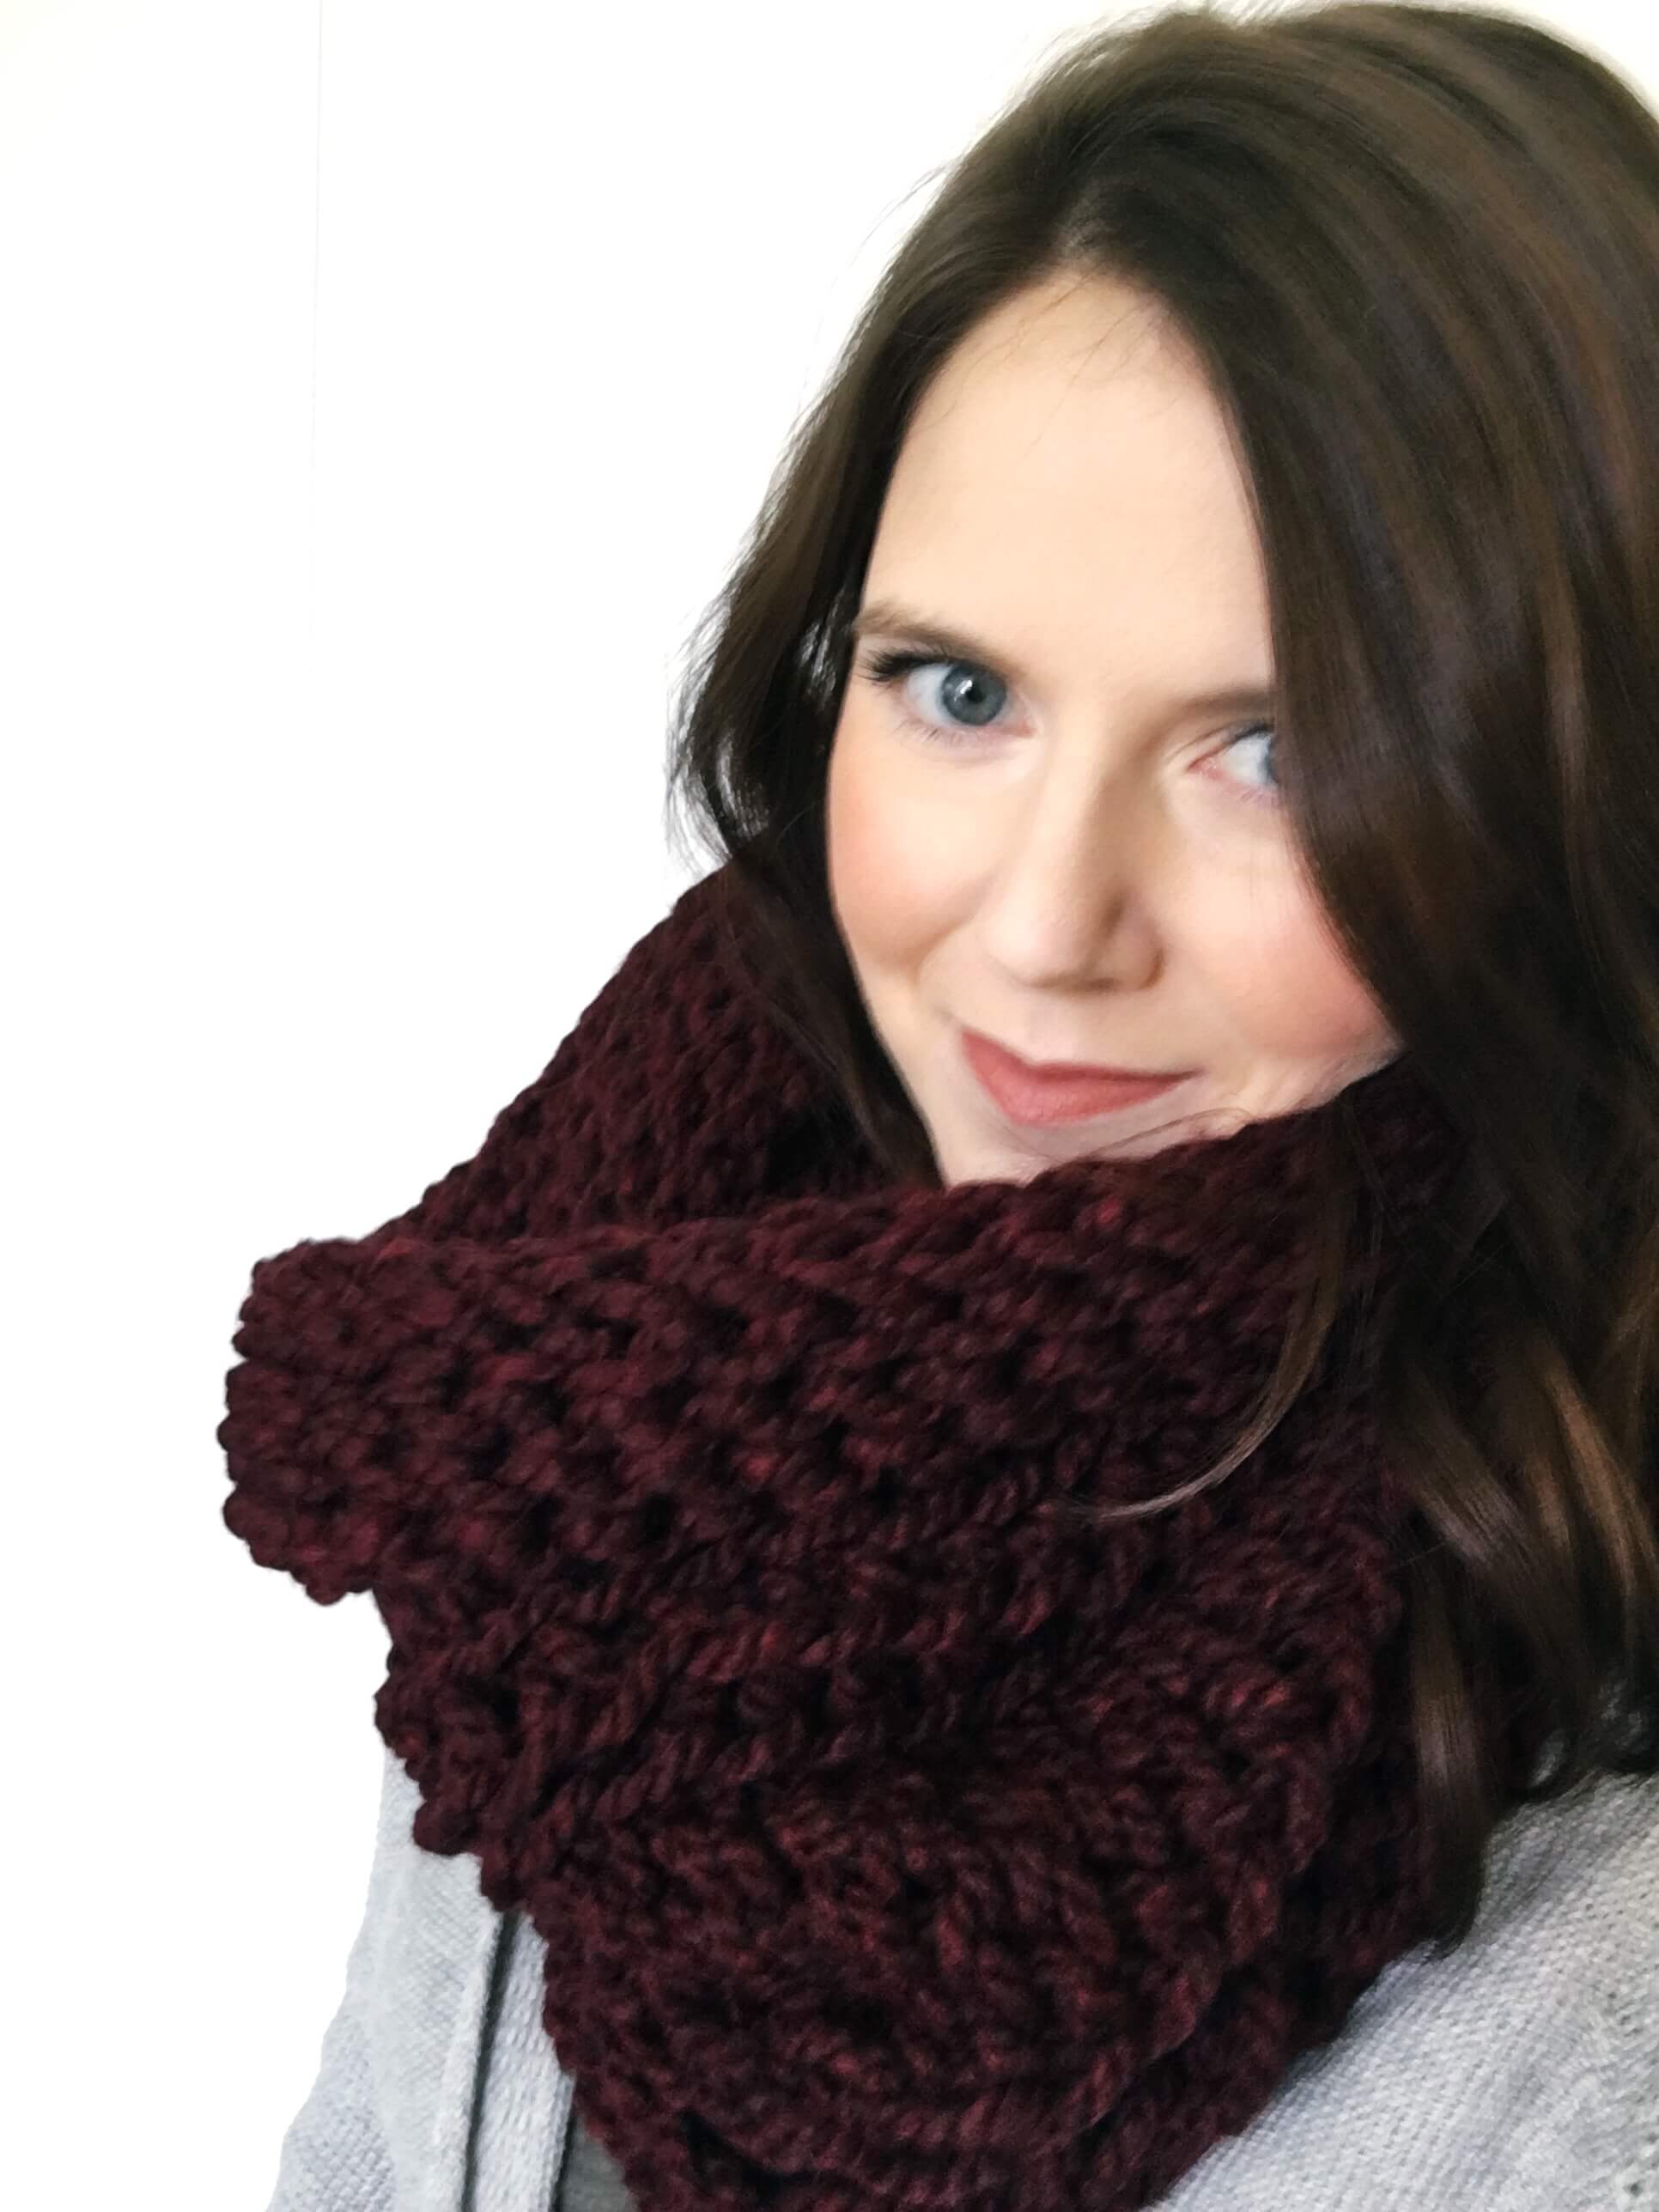 How To Make A Chunky Crochet Scarf That Will Lay Perfect